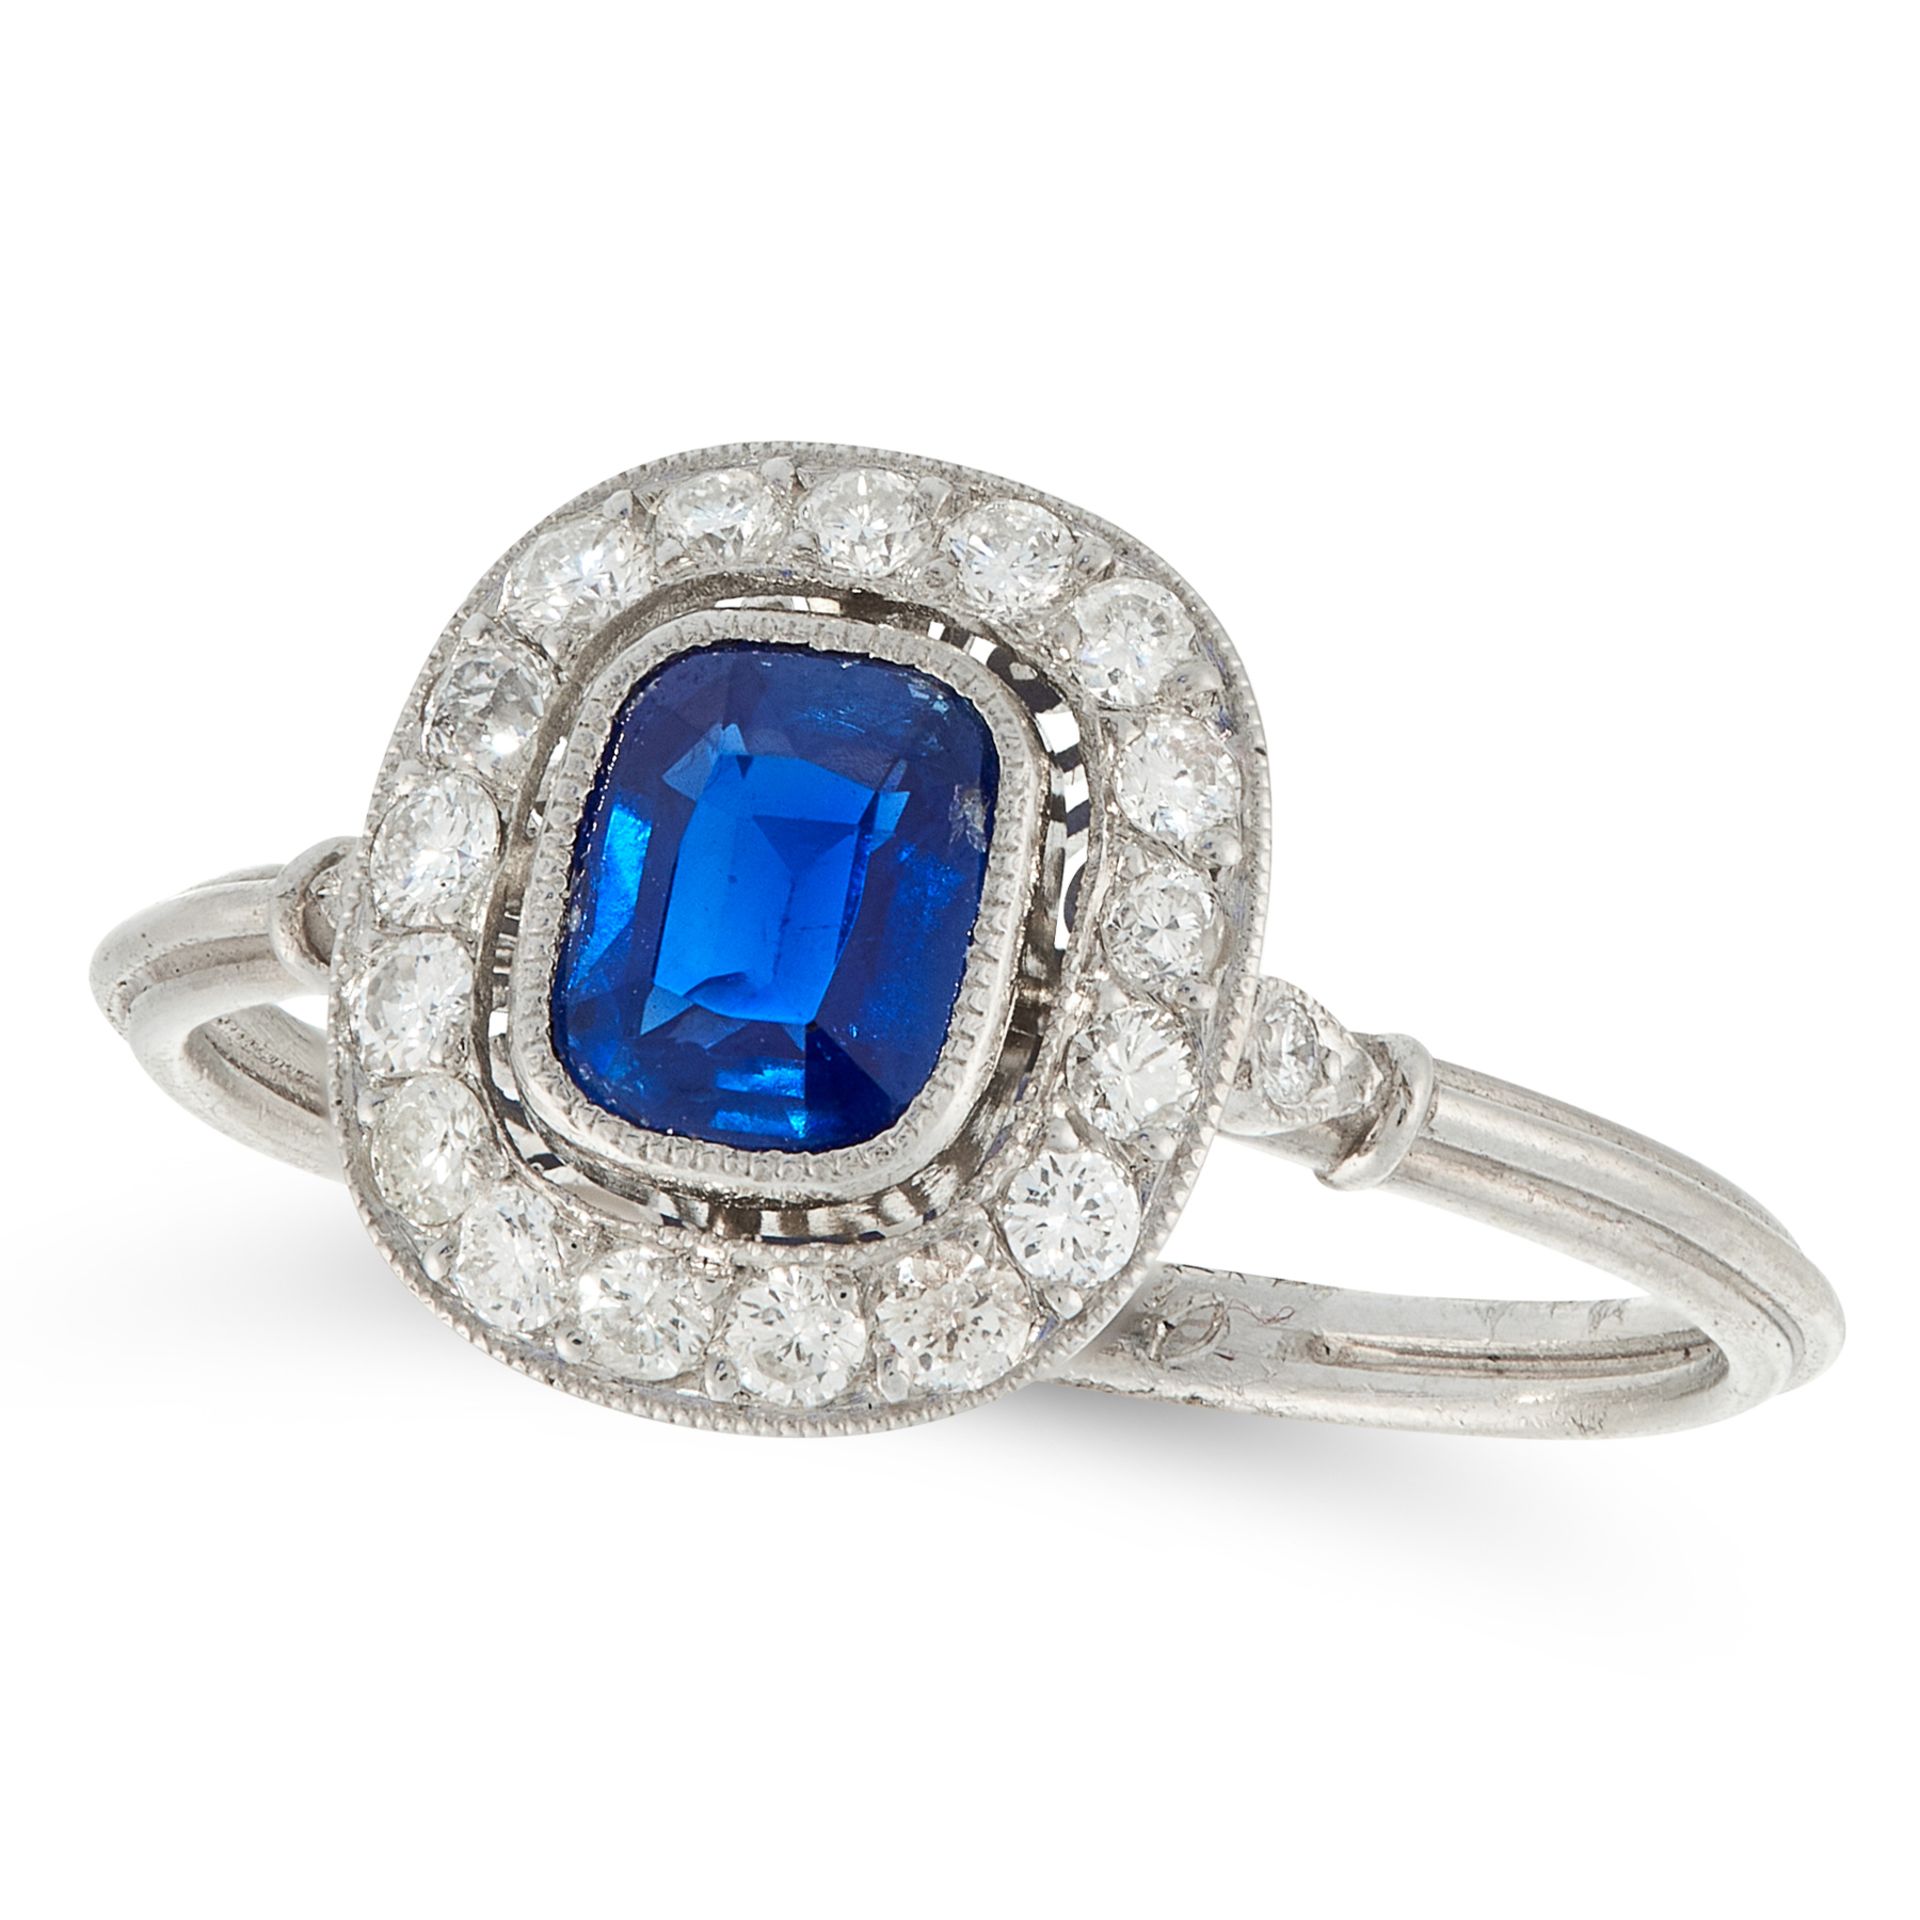 A SAPPHIRE AND DIAMOND DRESS RING in platinum, set with a cushion cut sapphire of 0.77 carats within - Image 2 of 2